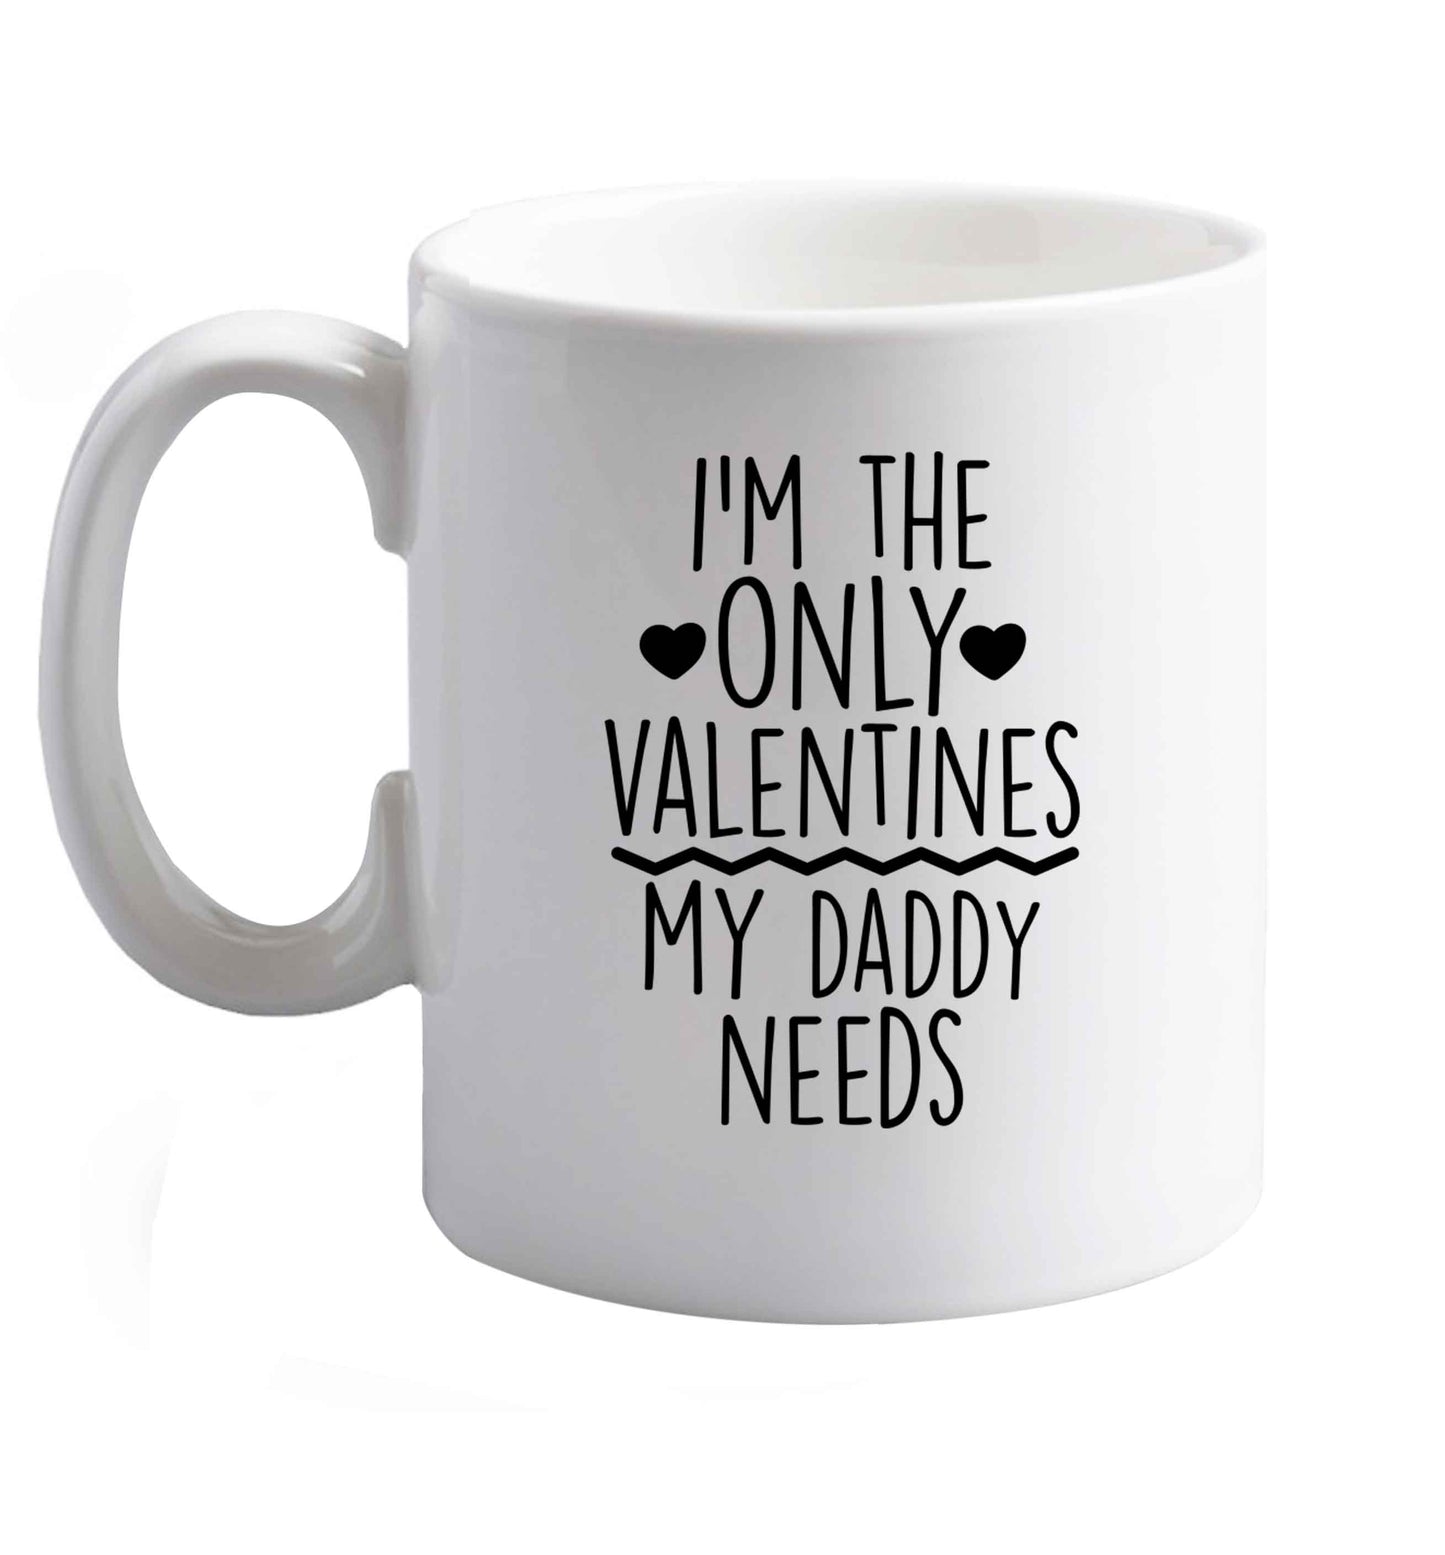 10 oz I'm the only valentines my daddy needs ceramic mug right handed